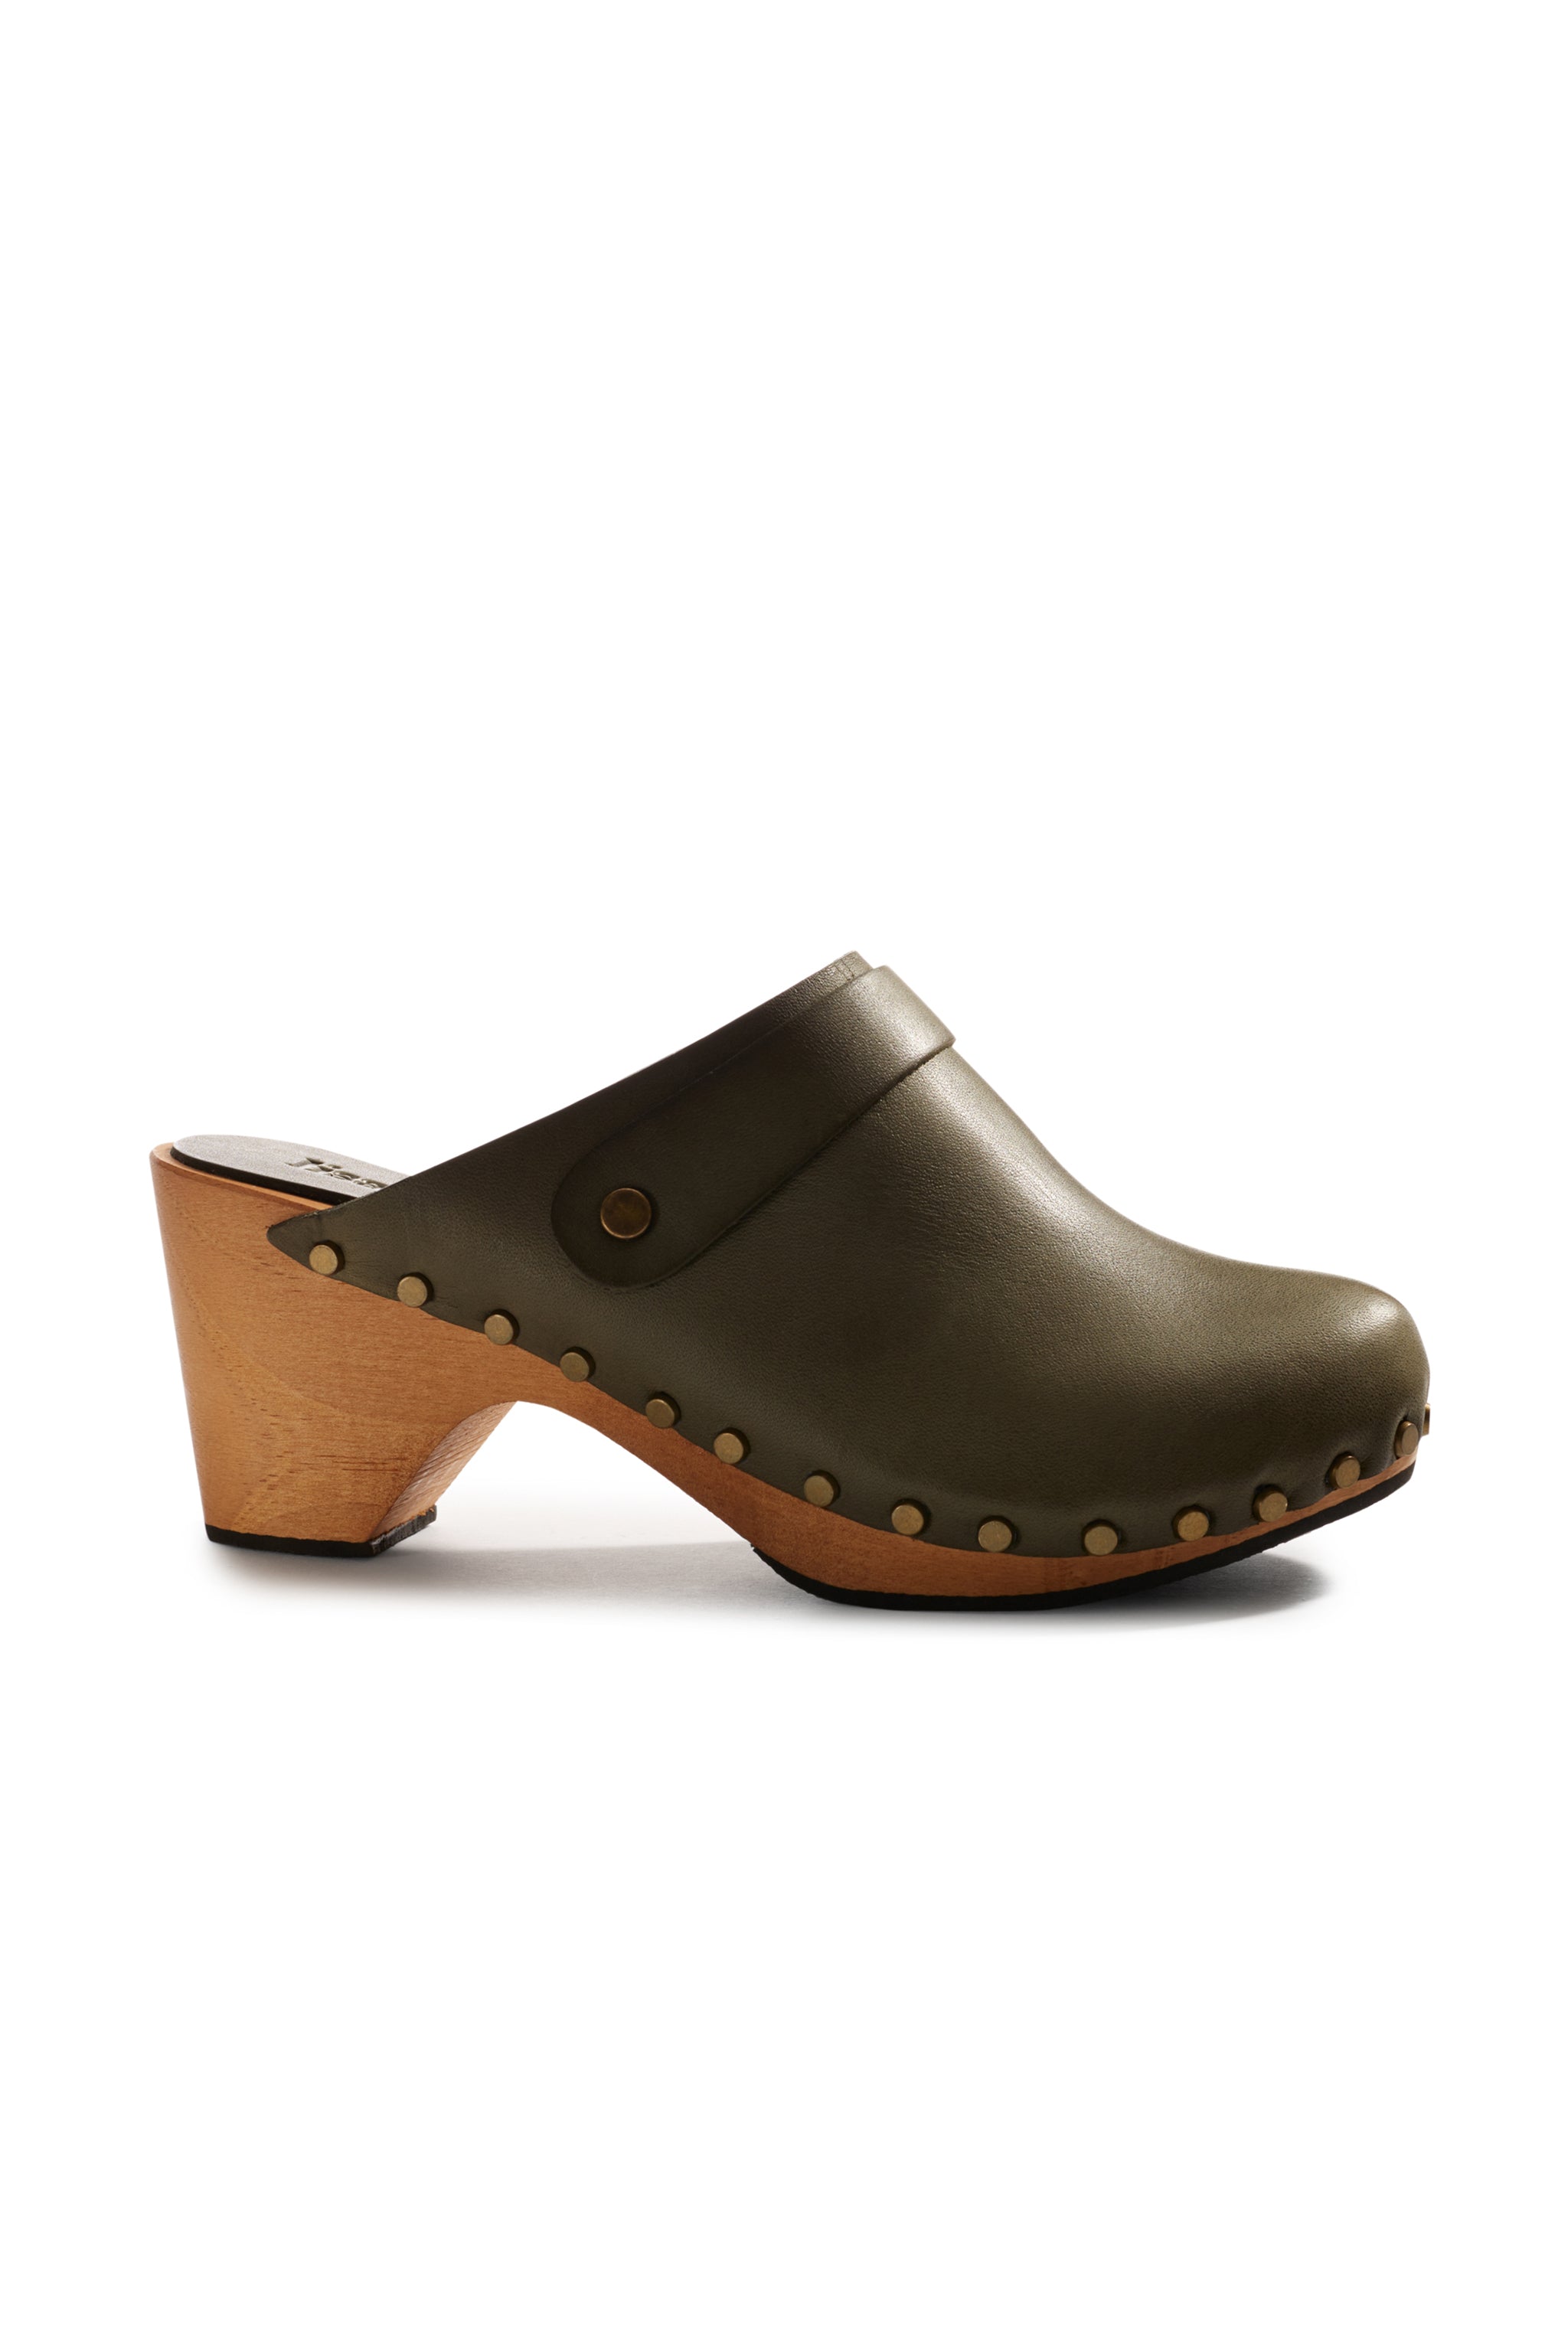 classic high heel clog in olive leather